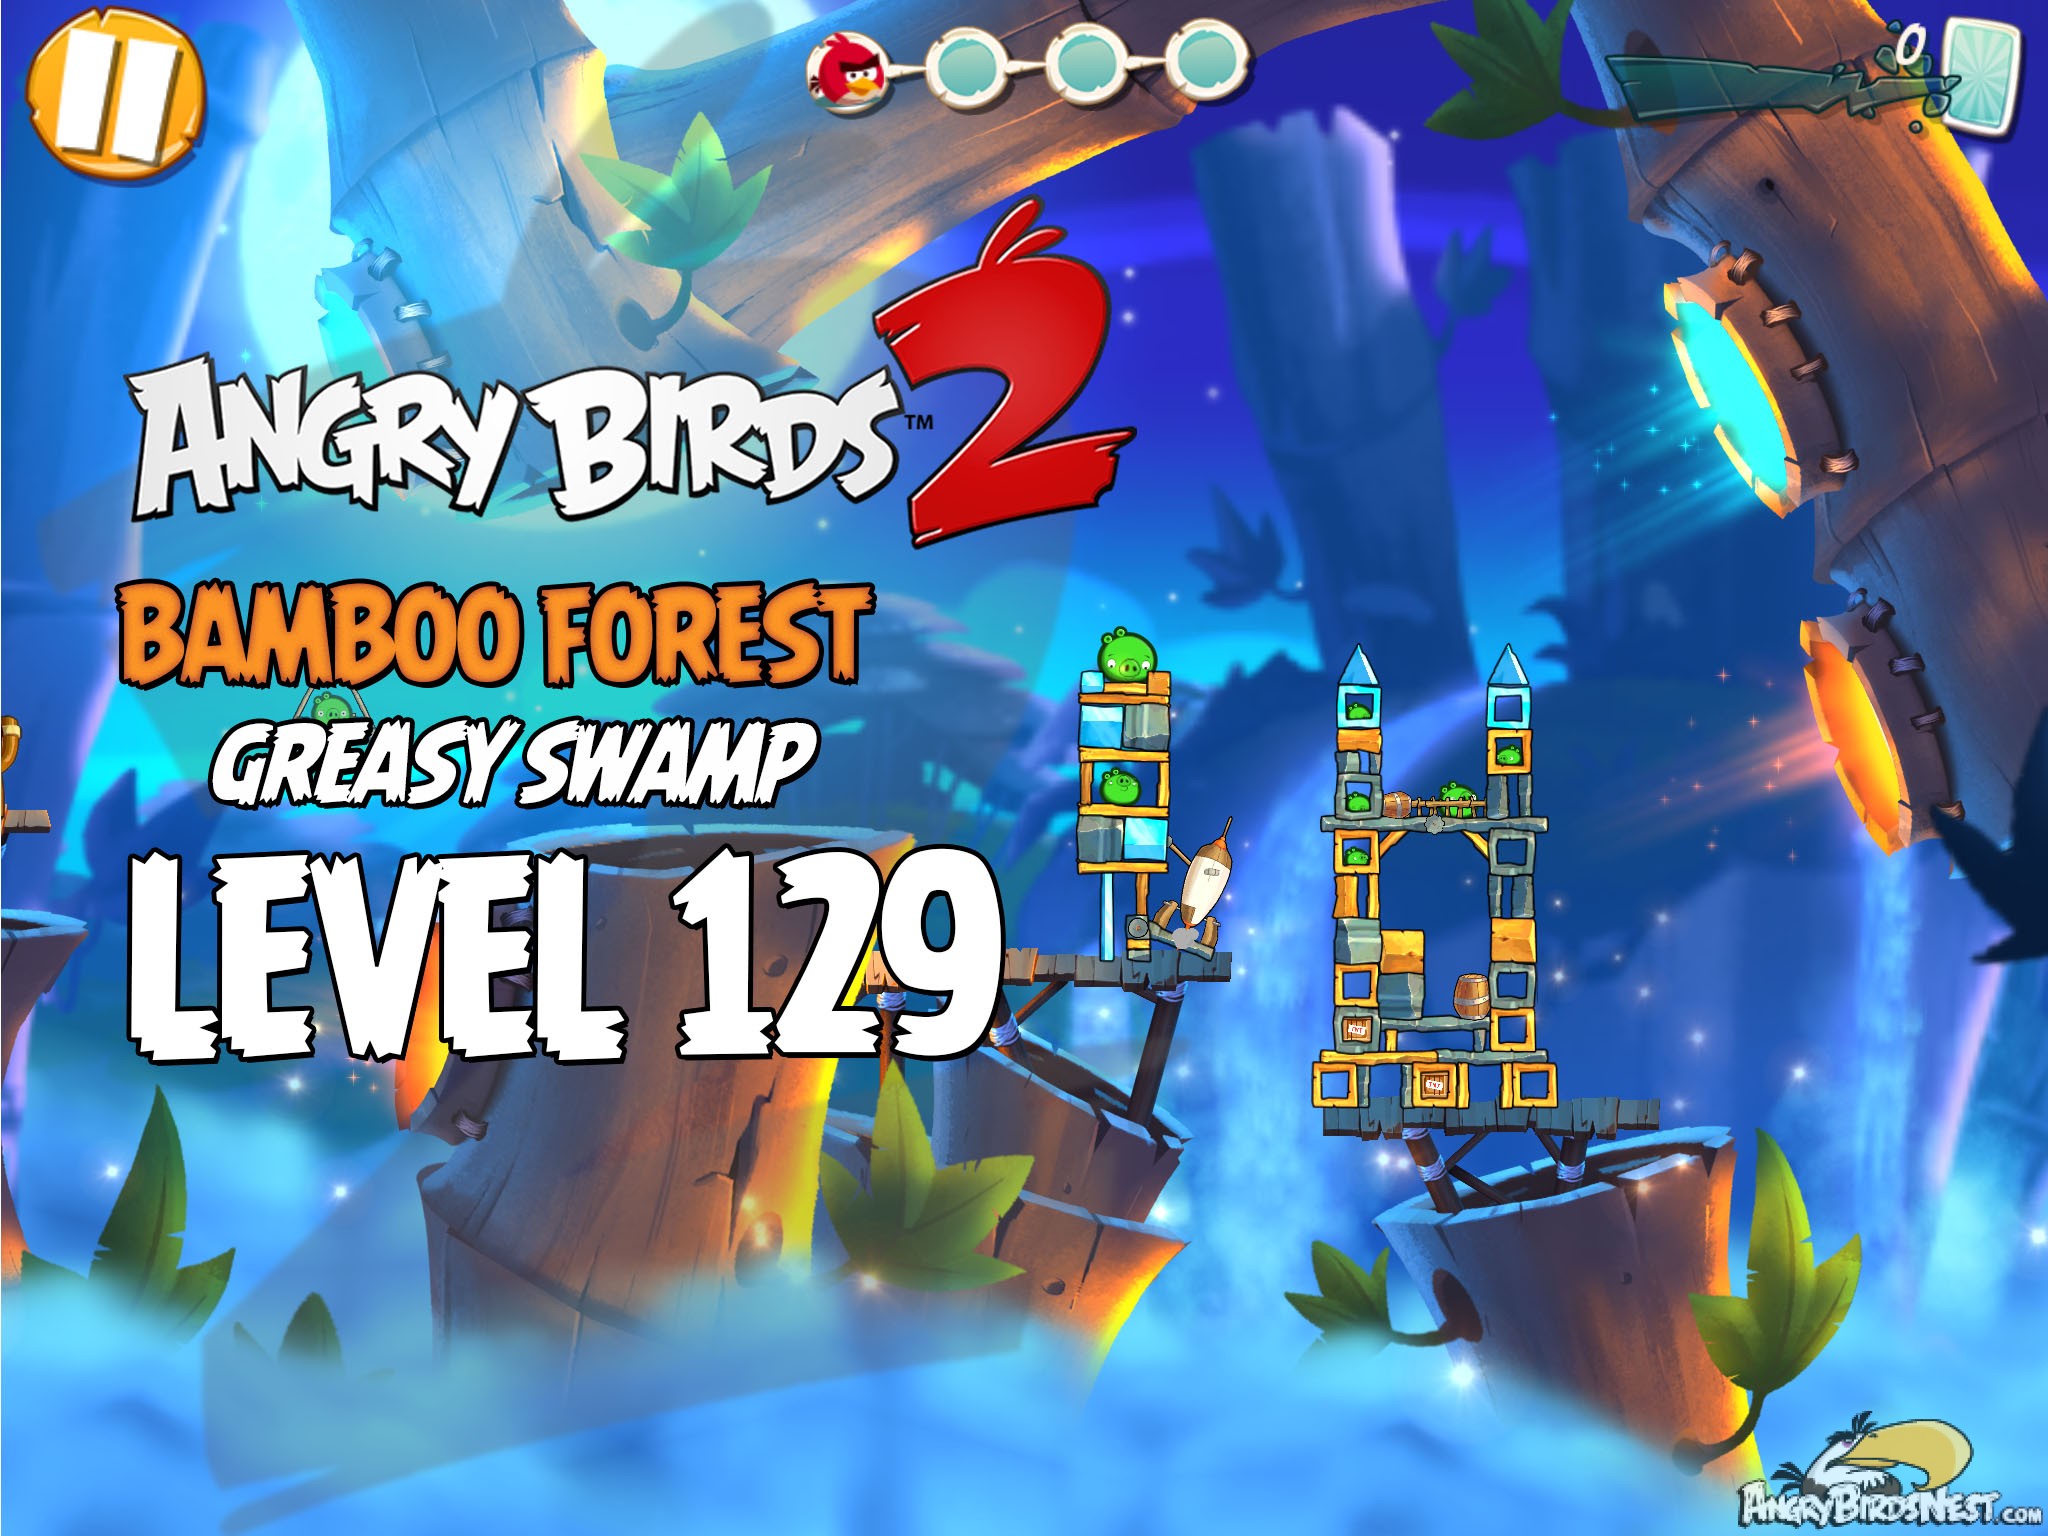 Angry Birds 2 Bamboo Forest Greasy Swamp Level 129